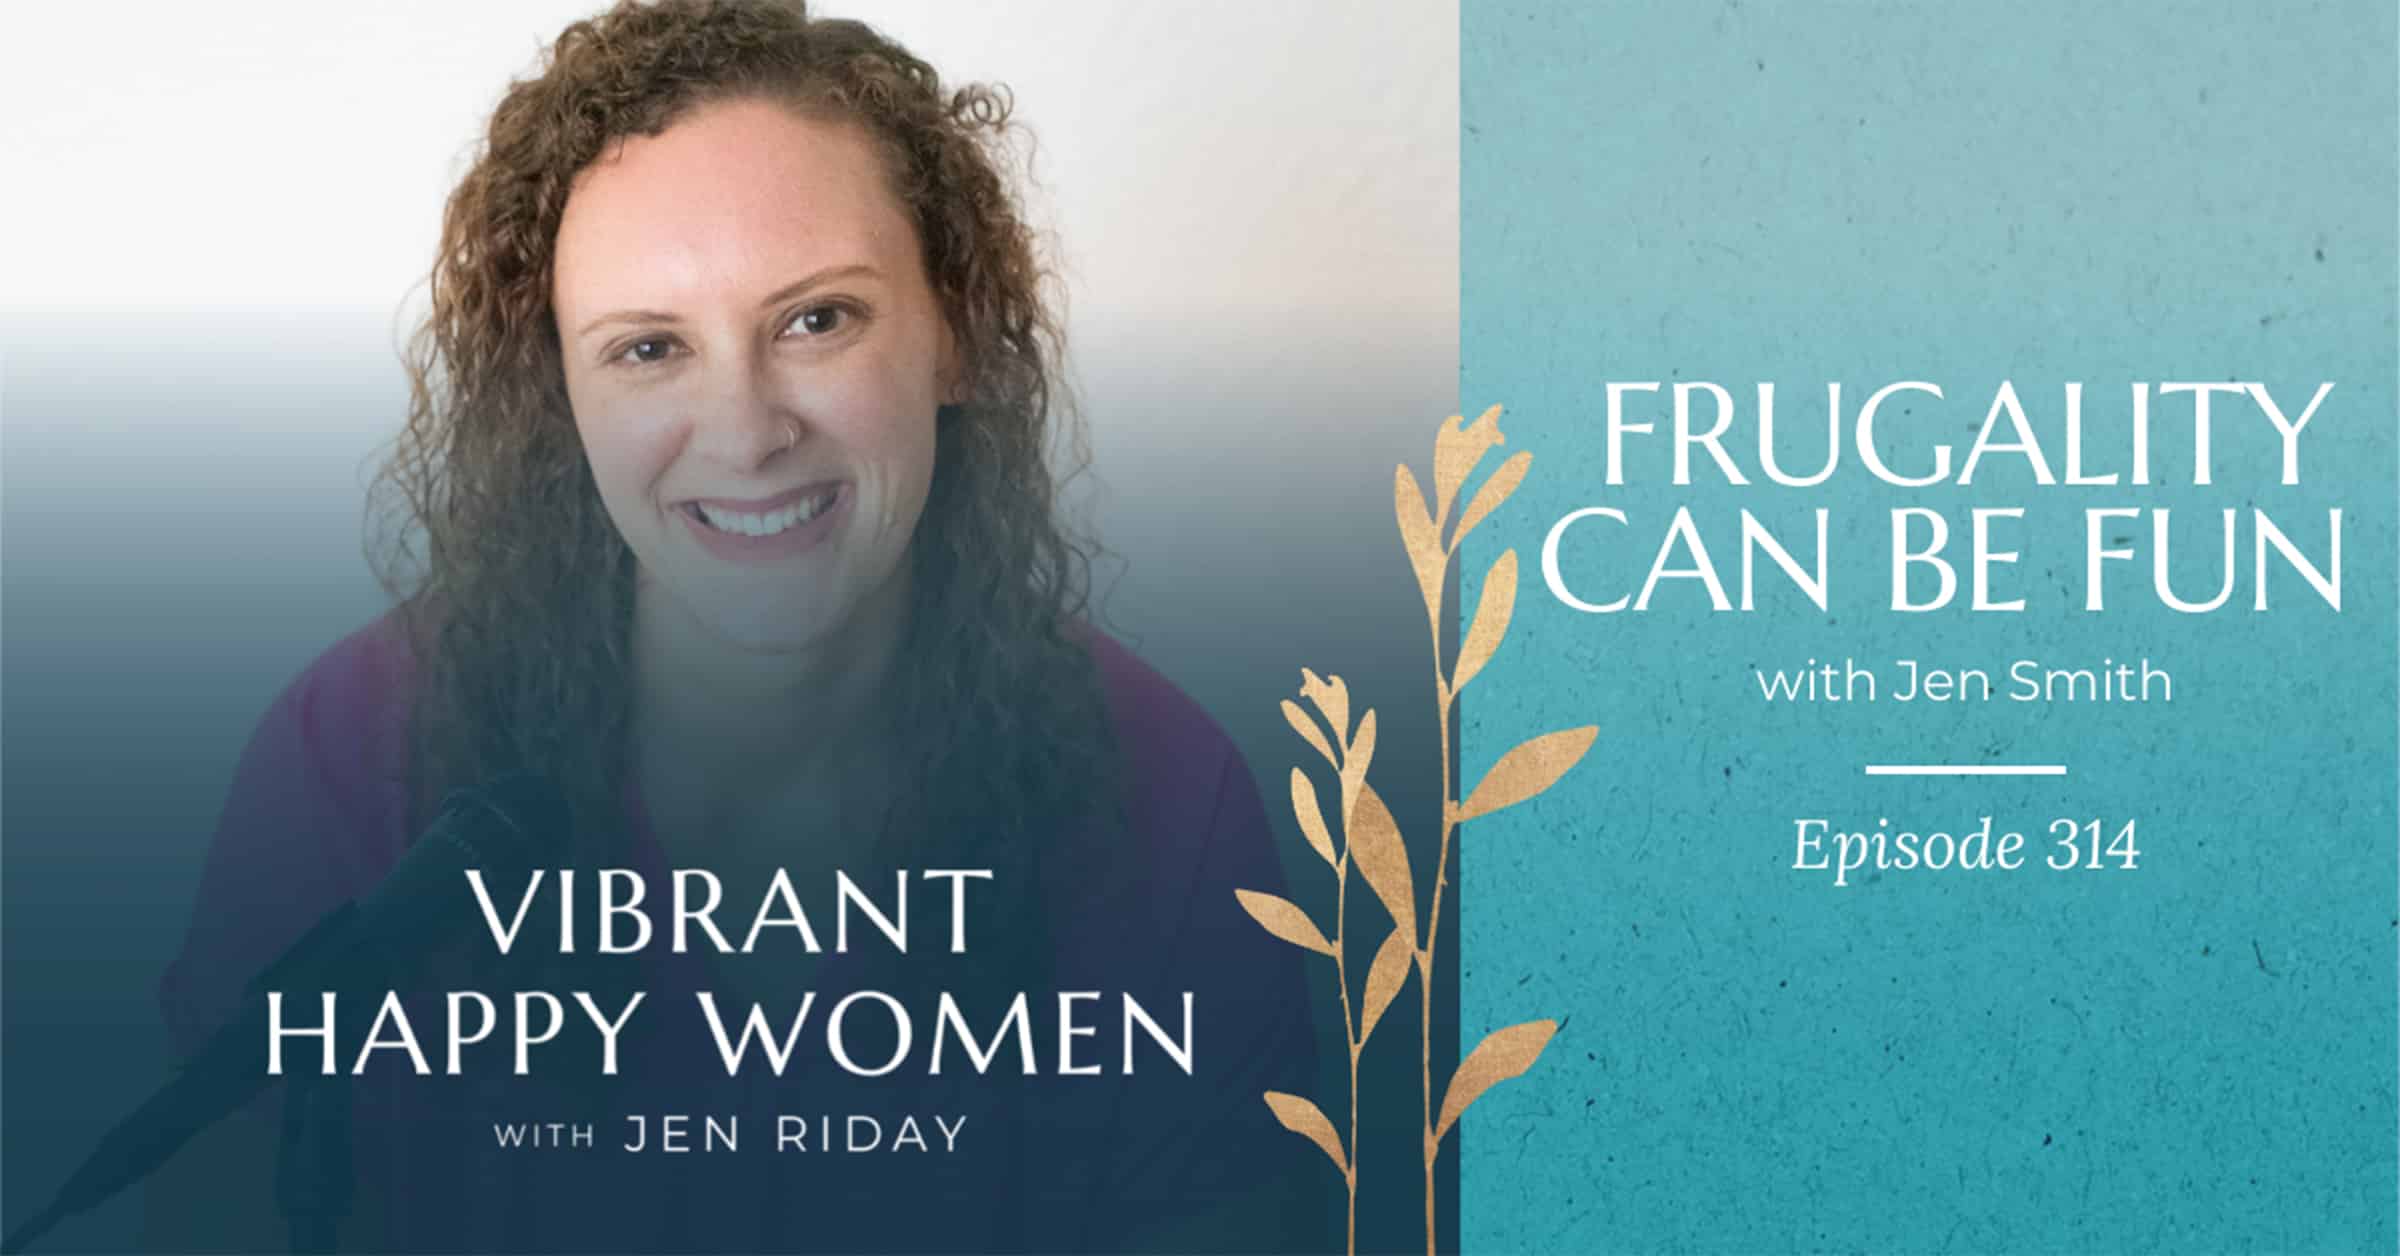 Vibrant Happy Women with Dr. Jen Riday | Frugality Can Be Fun (with Jen Smith)